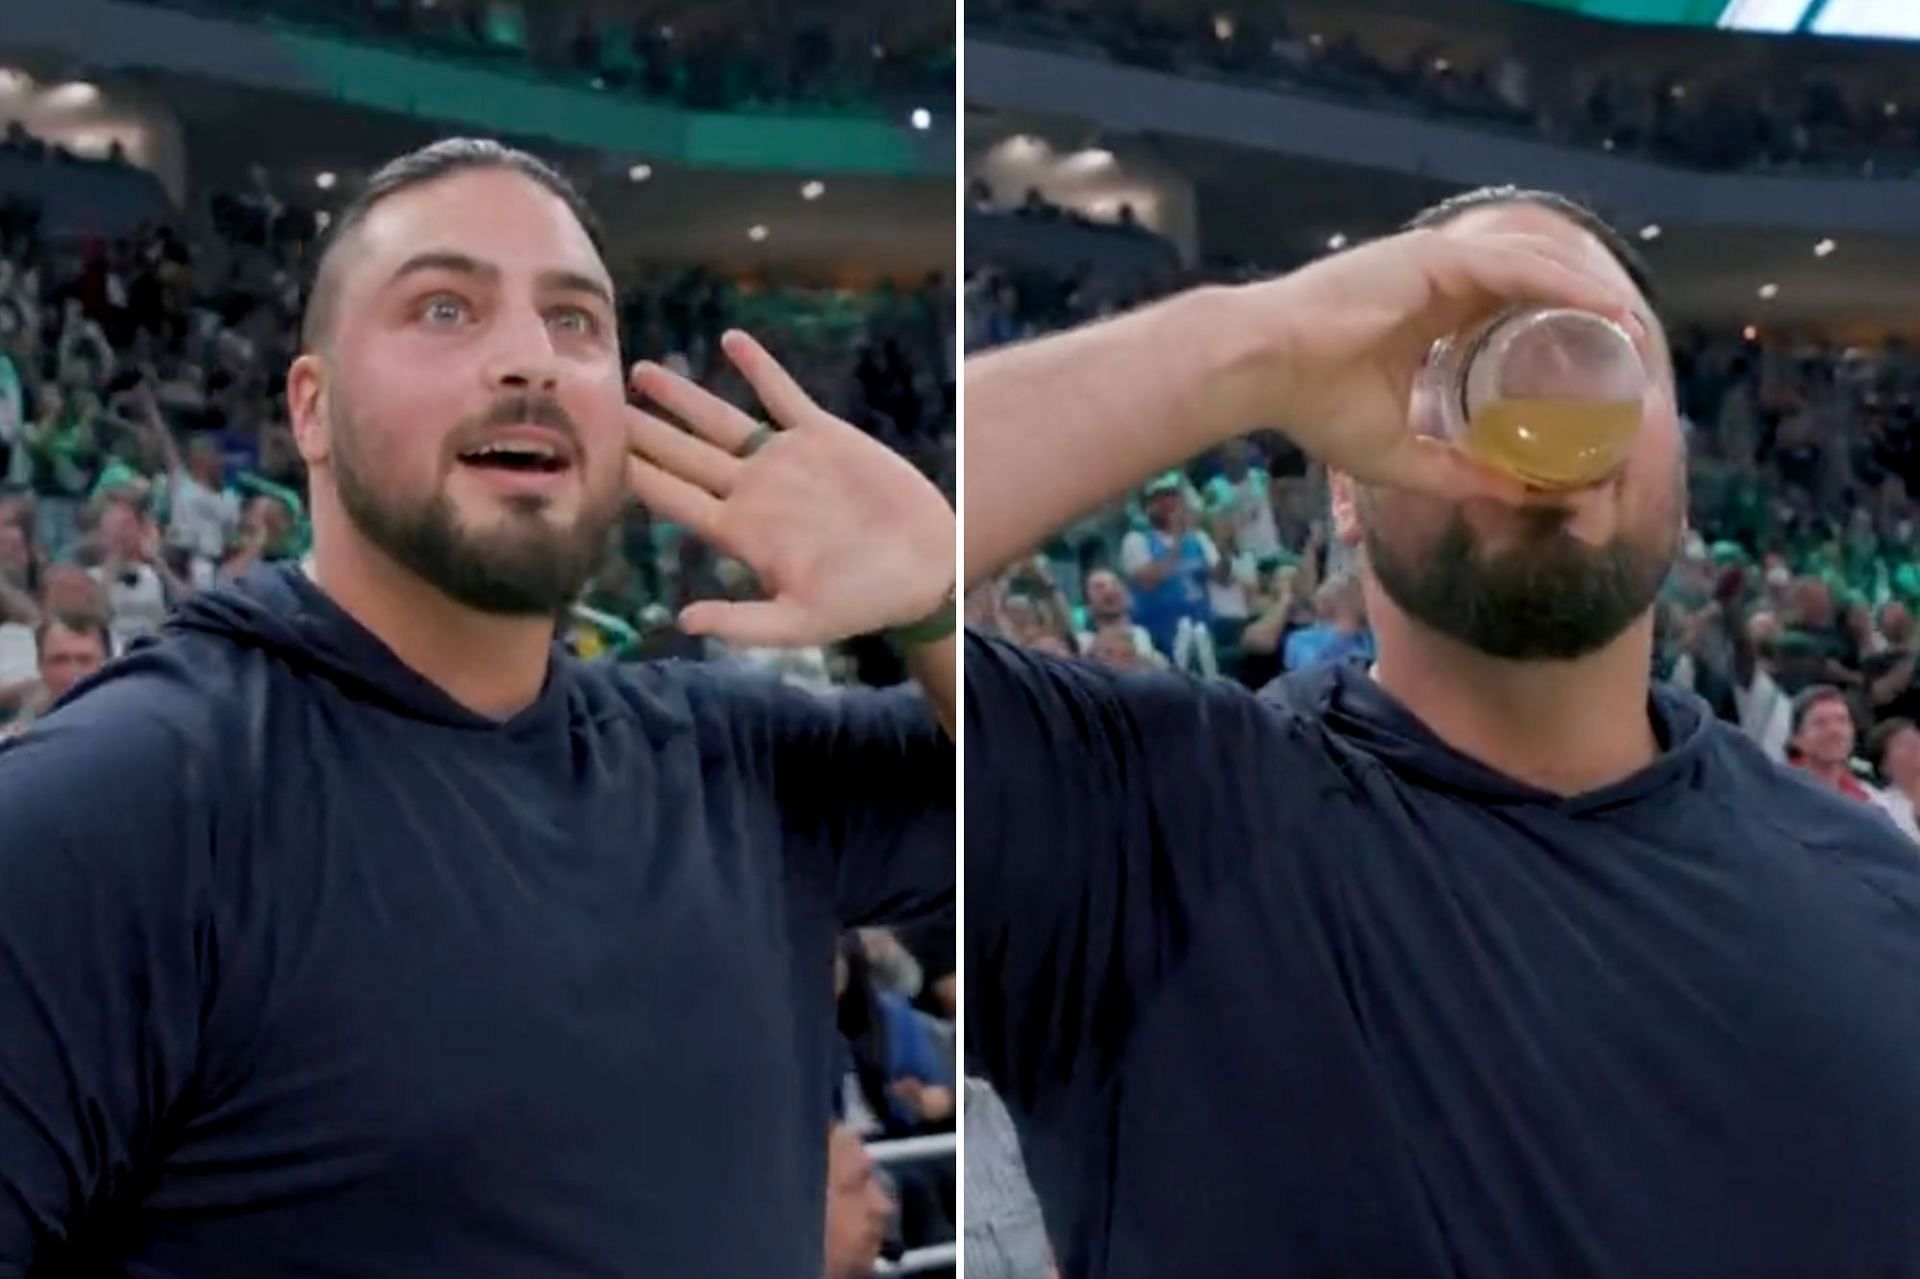 All-Pro left tackle David Bakhtiari chugging beers at Bucks home playoff game. Source: New York Post